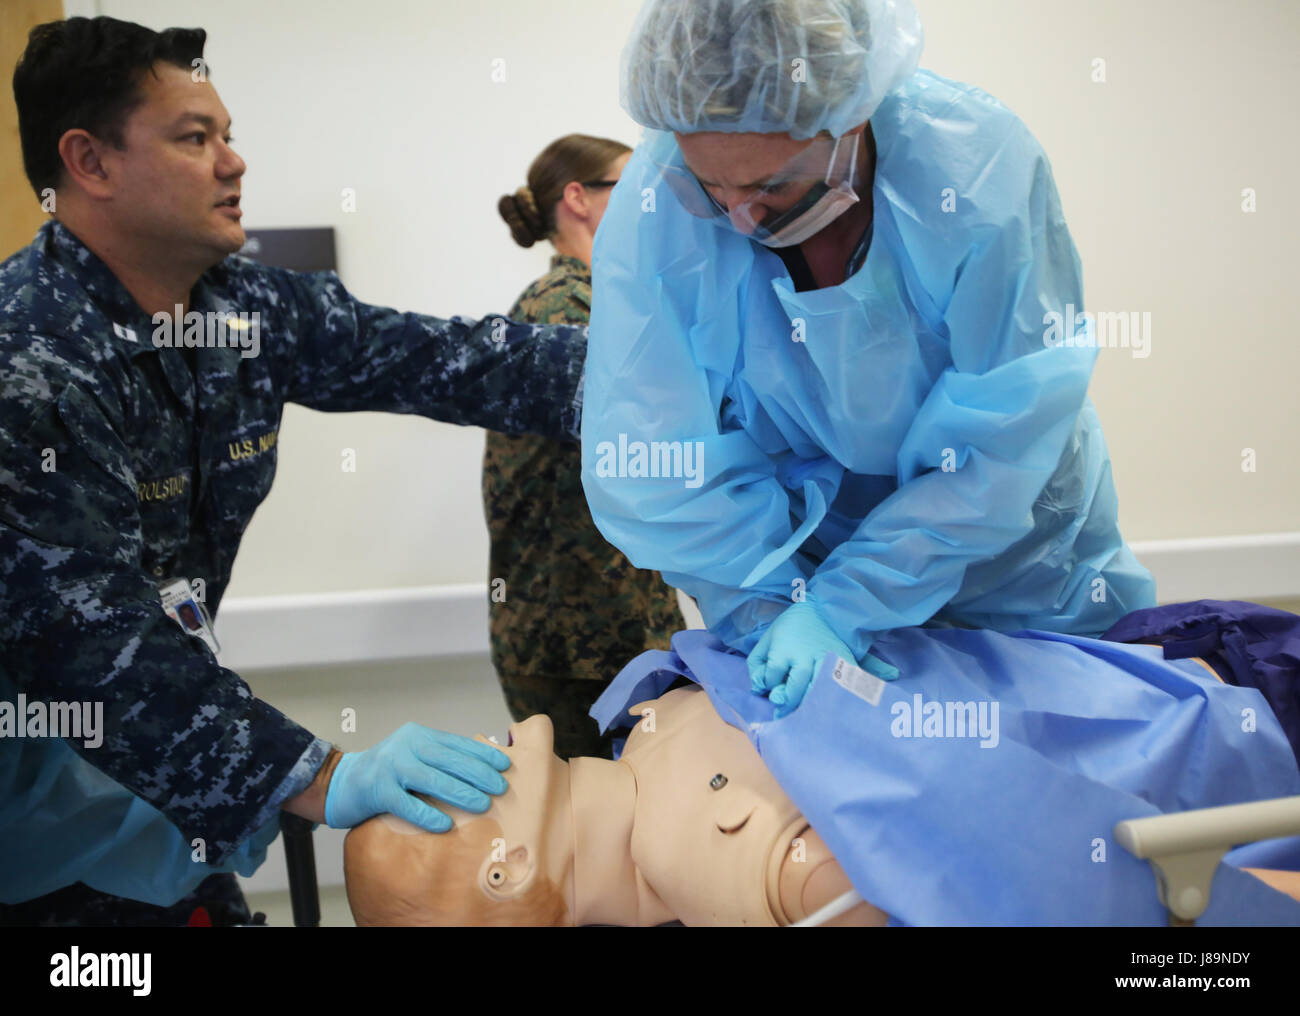 Naval Hospital Camp Lejeune’s emergency medical staff practices admitting a patient, using a manikin, into NHCL during an enroute care sustainment training at Camp Lejeune, N.C., May 24, 2017. The training was conducted to simulate a combat casualty evacuation in order to test the hospital’s trauma readiness and their ability to evacuate casualties under combat conditions. The NHCL’s emergency medical staff teamed with 2nd Medical Battalion, 2nd Marine Logistics Group’s medical staff and Marine Medium Tilt Rotor Squadron VMM 264. (U.S. Marine Corps photo by Lance Cpl. Raul Torres) Stock Photo